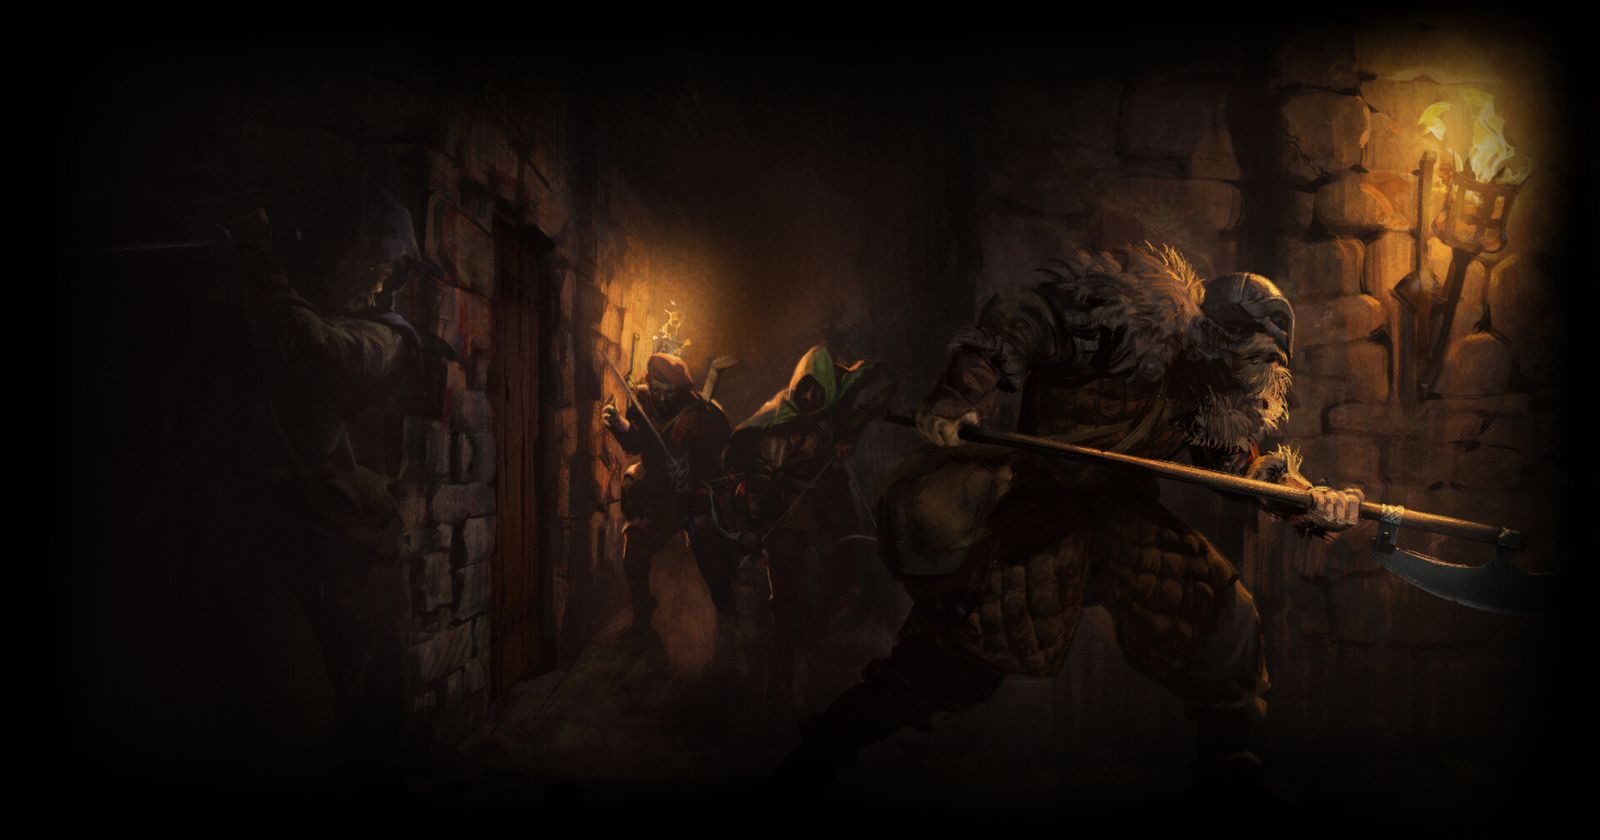 Surprise! PvP dungeon crawler Dark and Darker is out in early